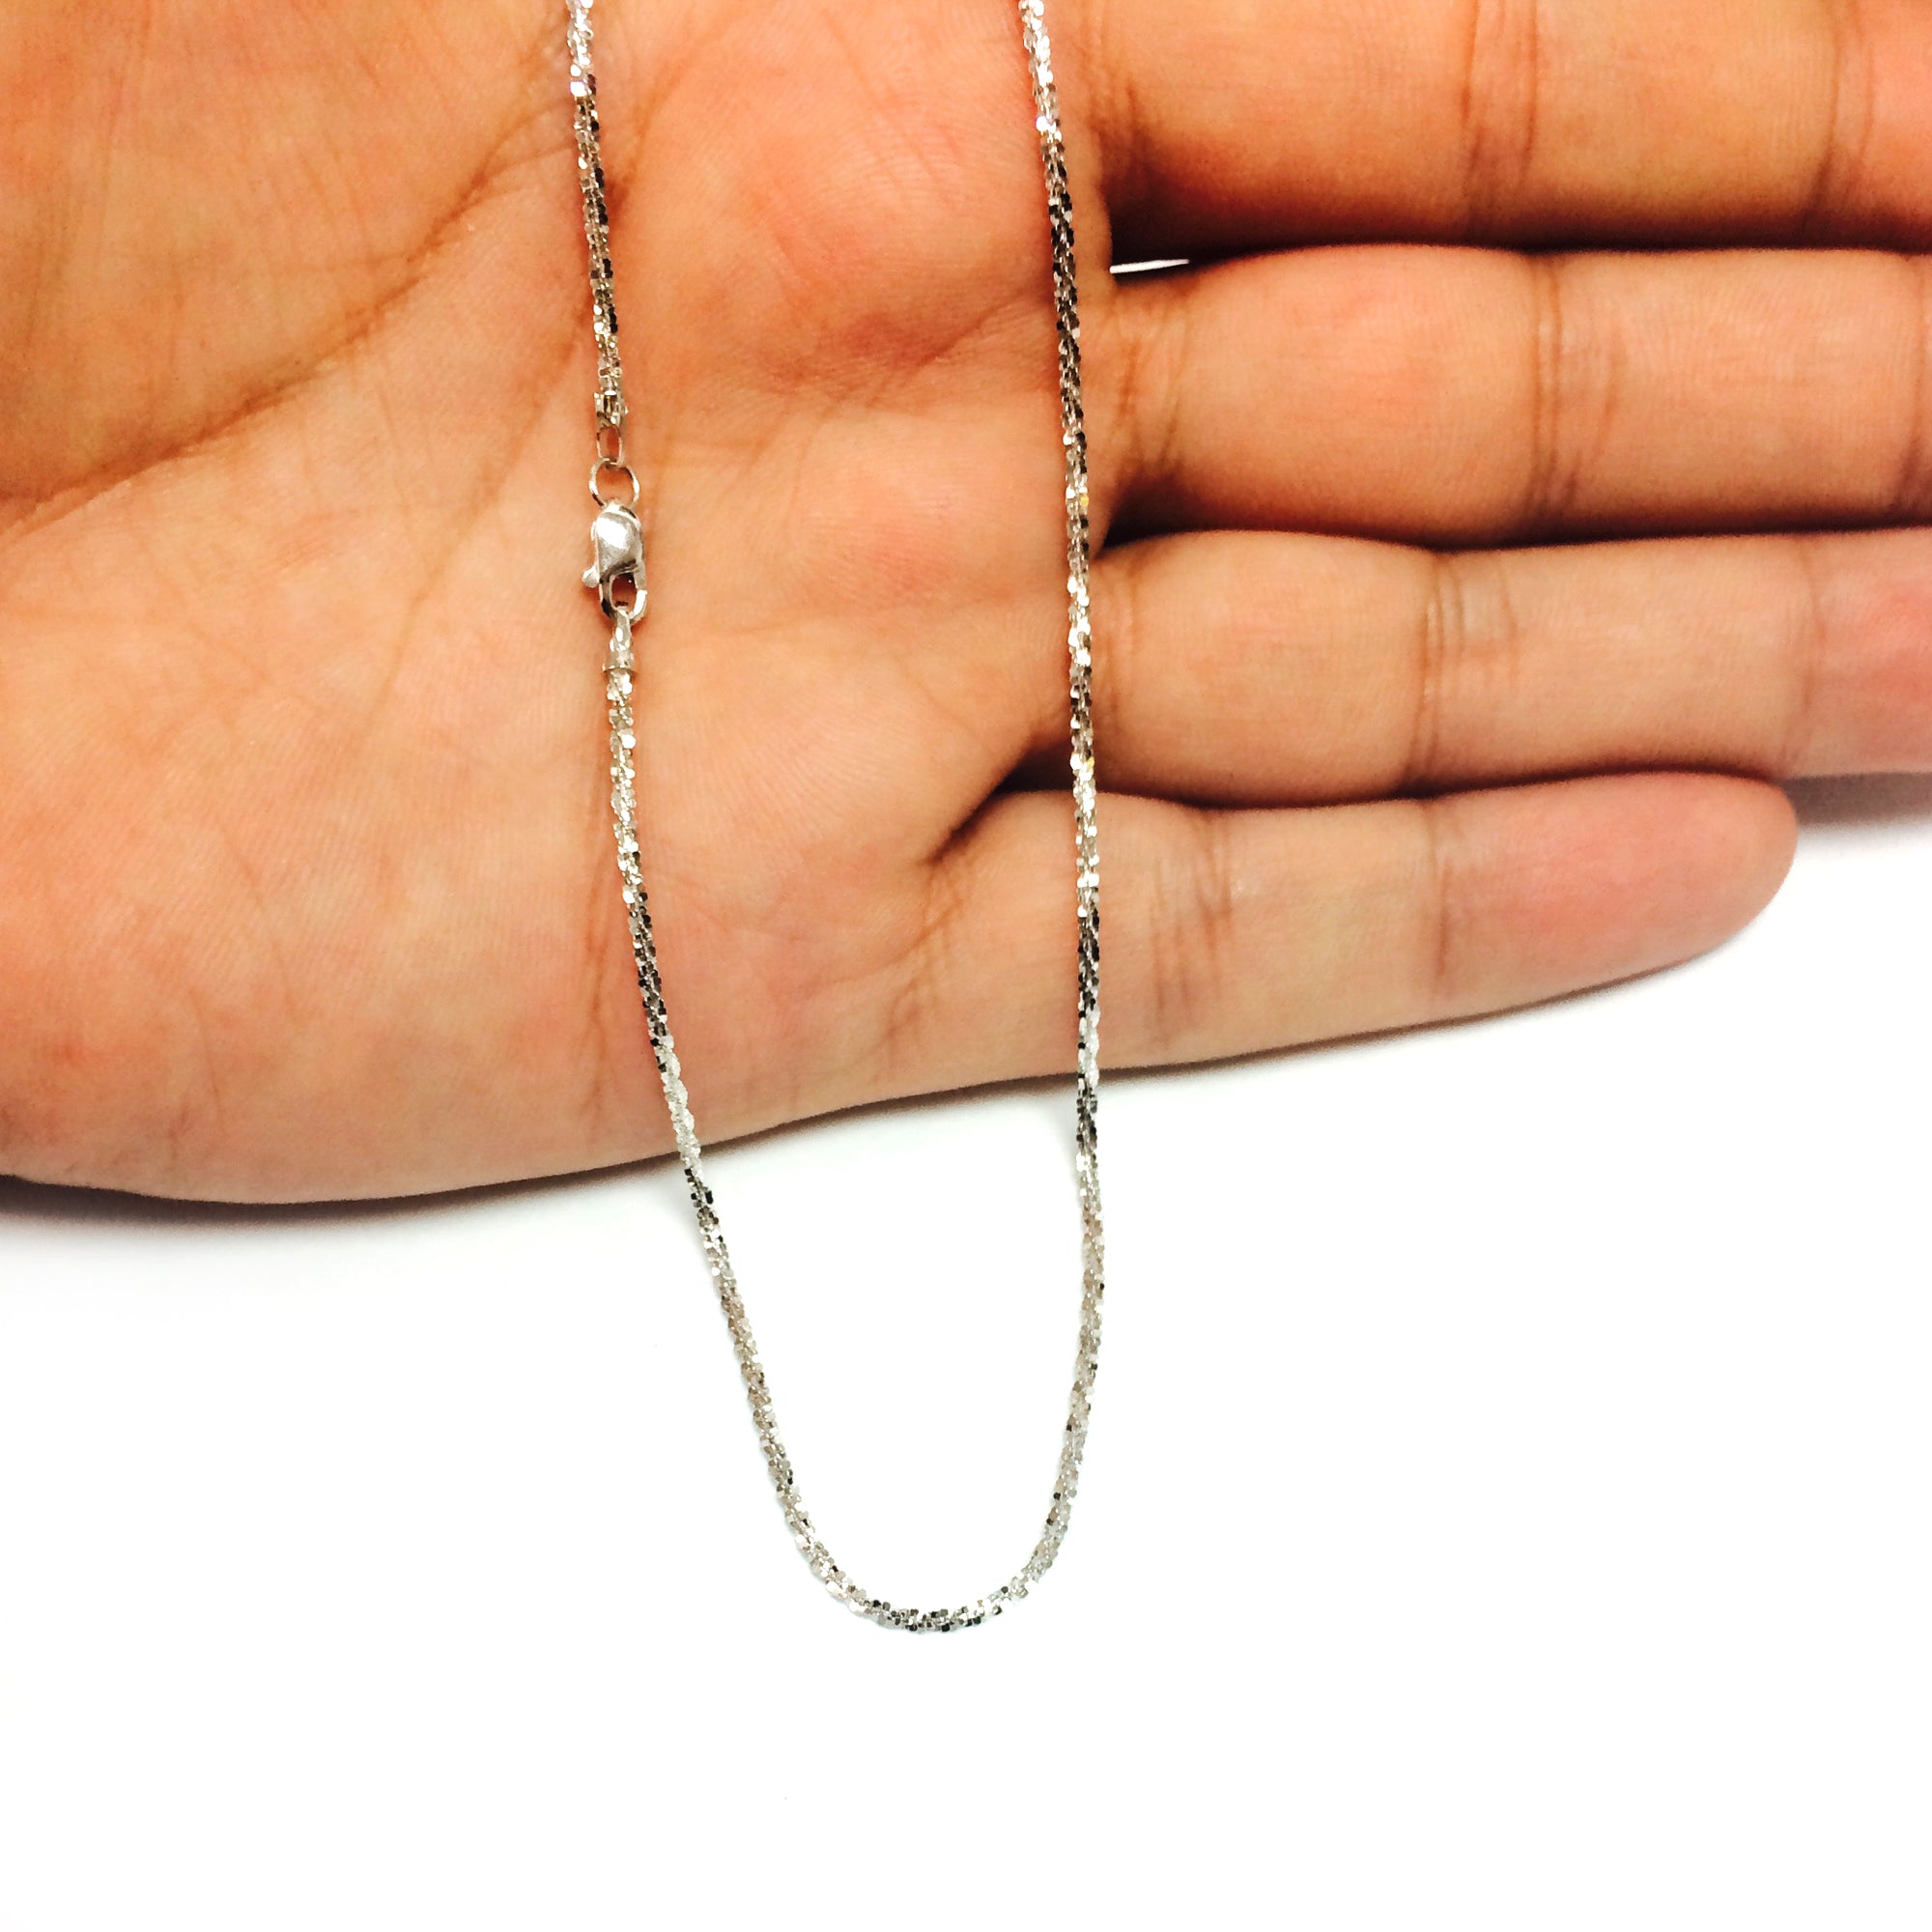 10k White Gold Sparkle Chain Necklace, 1.5mm fine designer jewelry for men and women